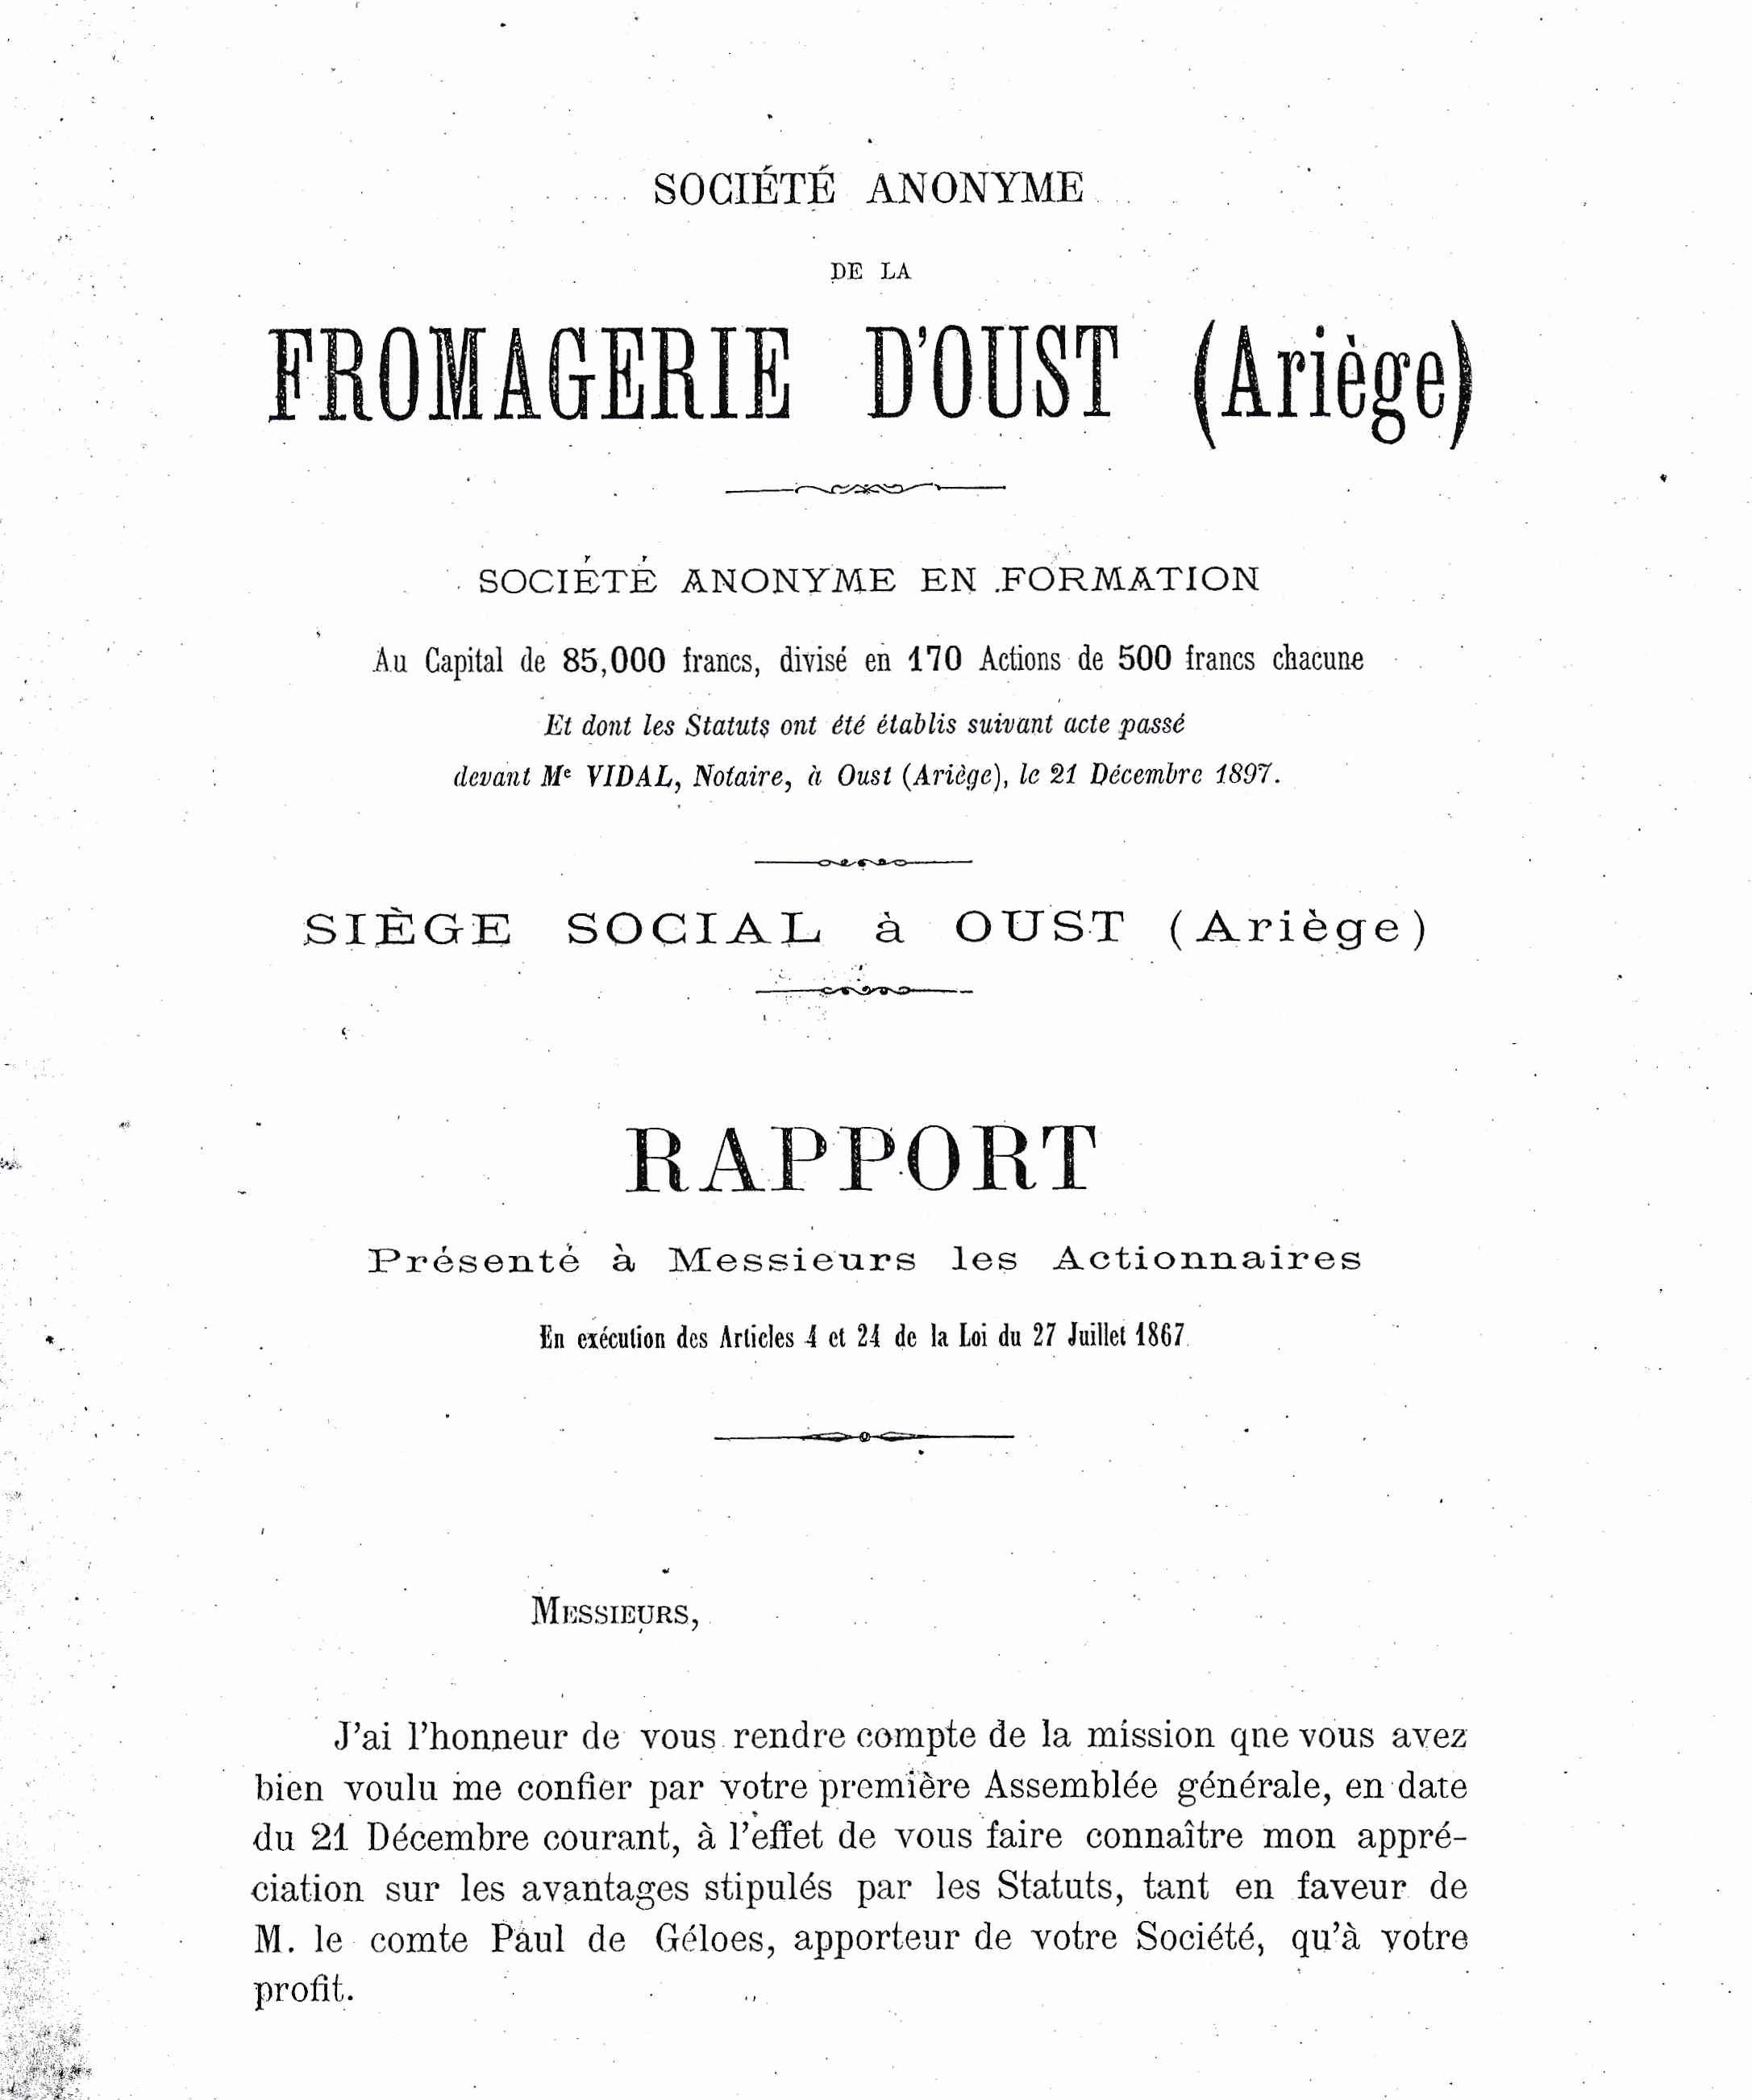 N932  FROMAGE OUST ARIEGE AVANT 1912 ?